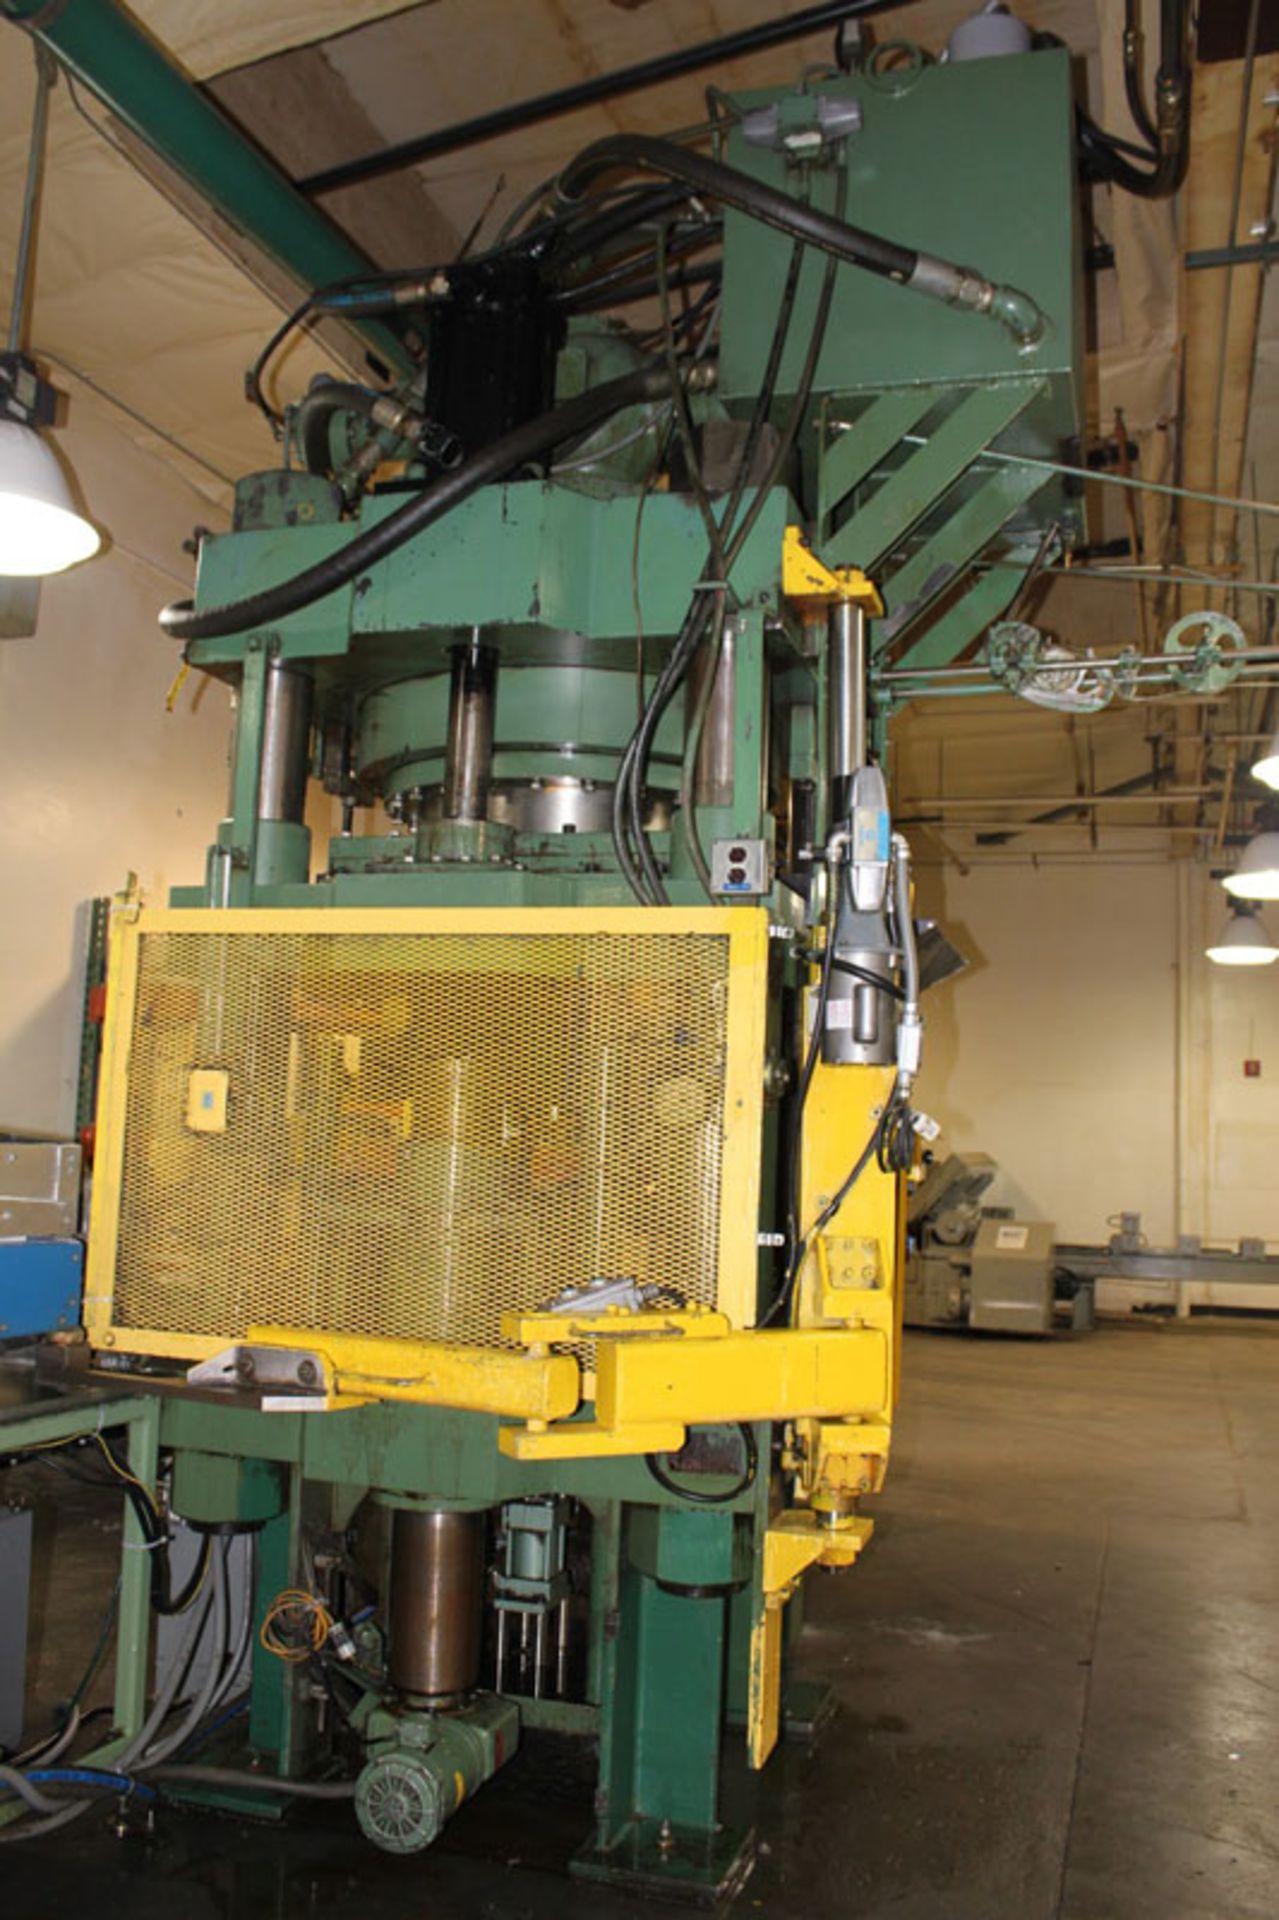 1981 800-Ton Modern Hydraulic 4 Post Press, Mdl. 1R, S/N: 2249, Located in Huntington Park, CA - Image 7 of 14